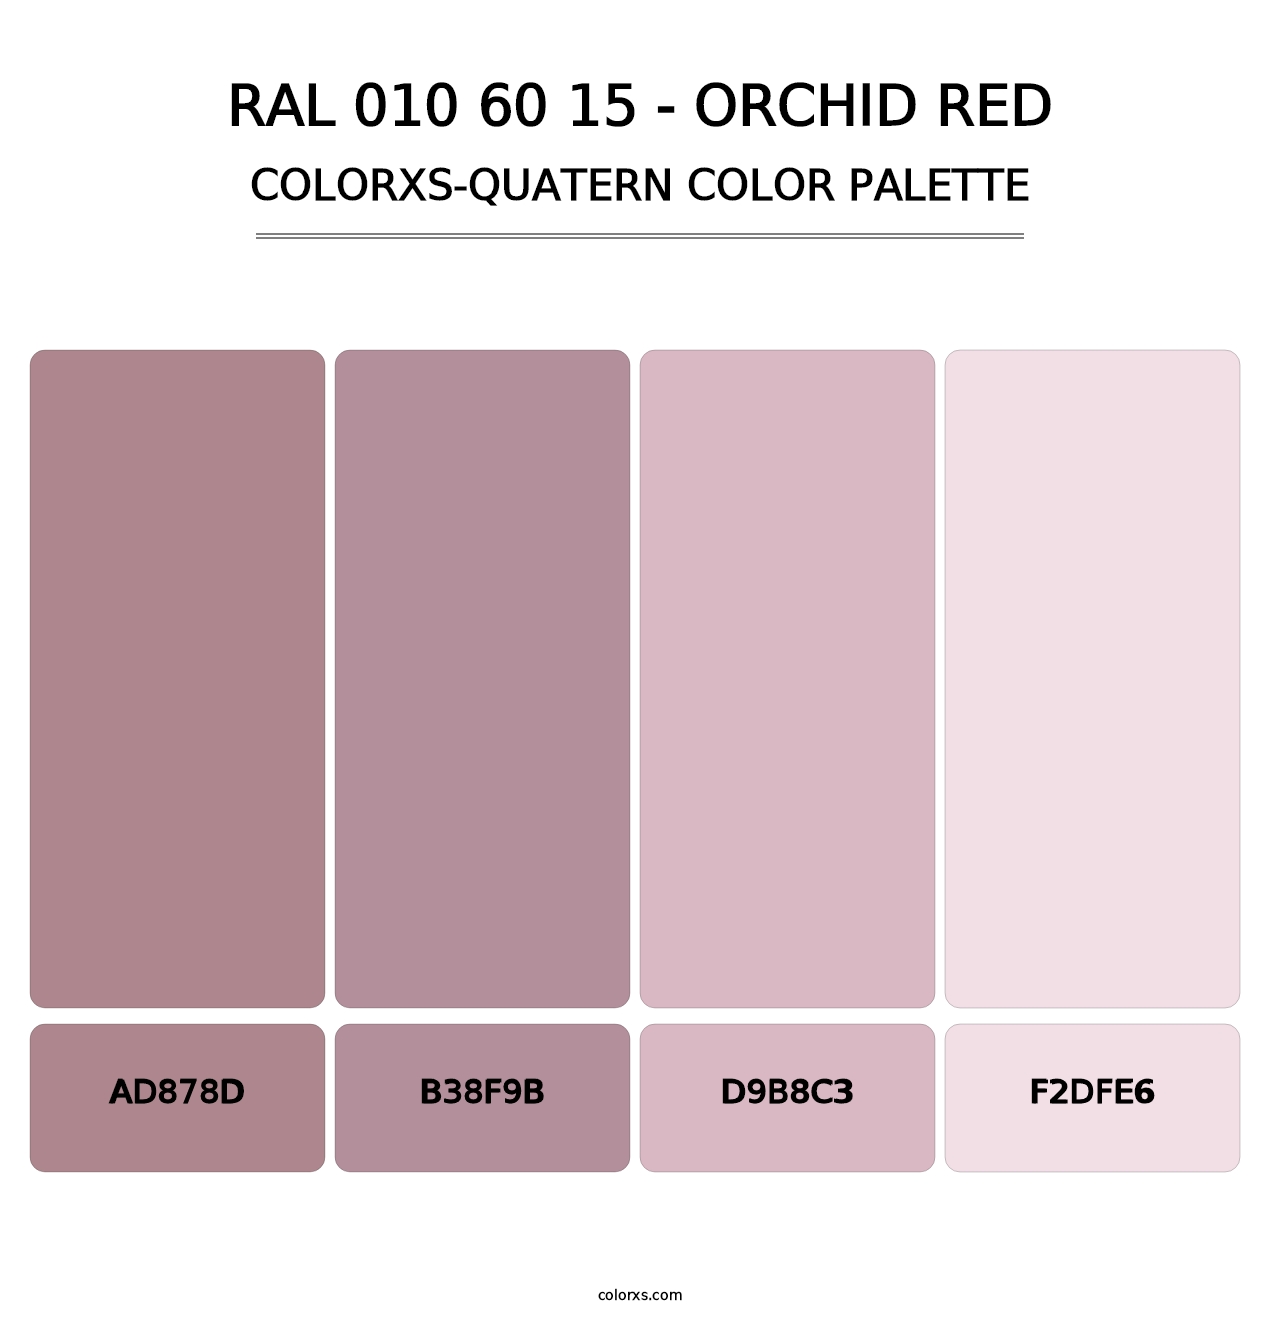 RAL 010 60 15 - Orchid Red - Colorxs Quatern Palette